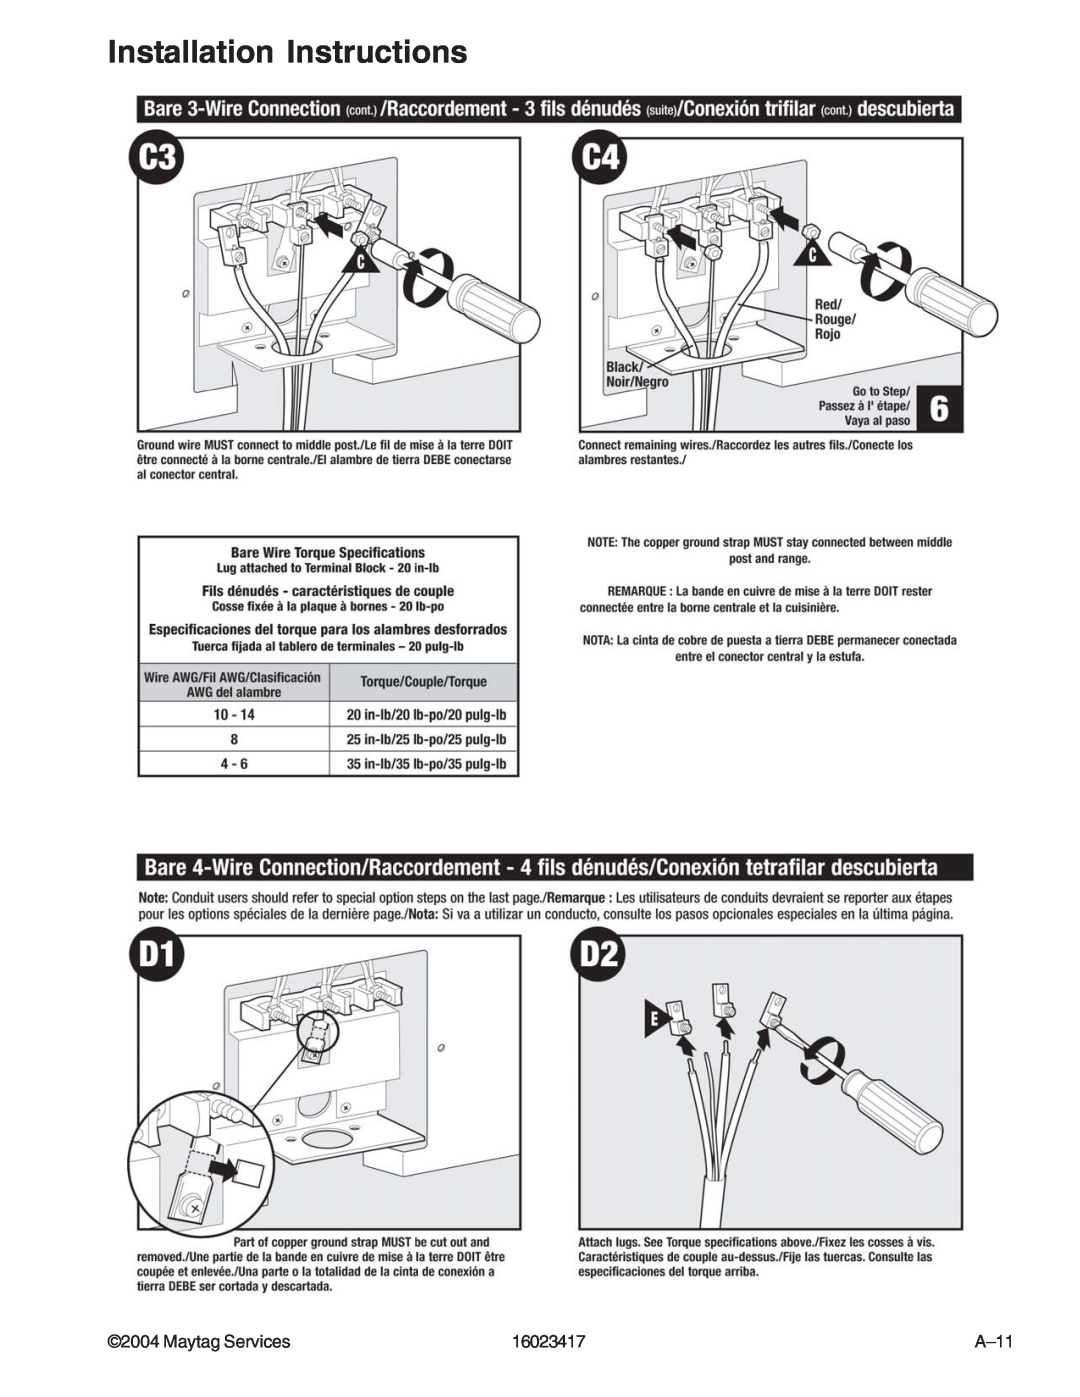 Jenn-Air JDR8895AAB/S/W, JDR8895ACS/W manual Installation Instructions, Maytag Services, 16023417, A–11 